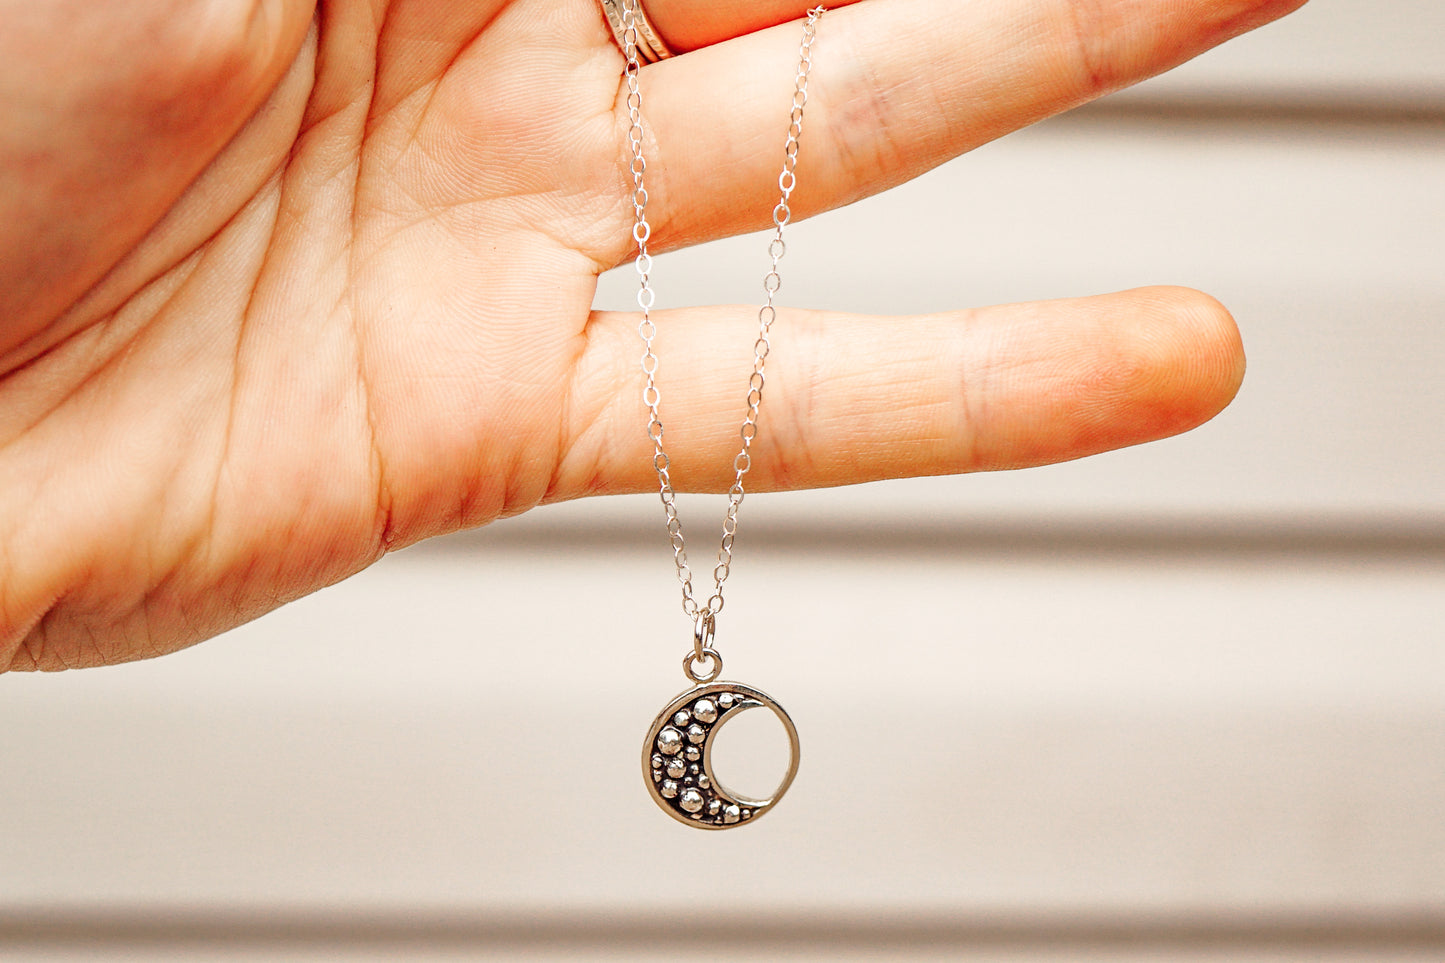 Over the Moon necklace